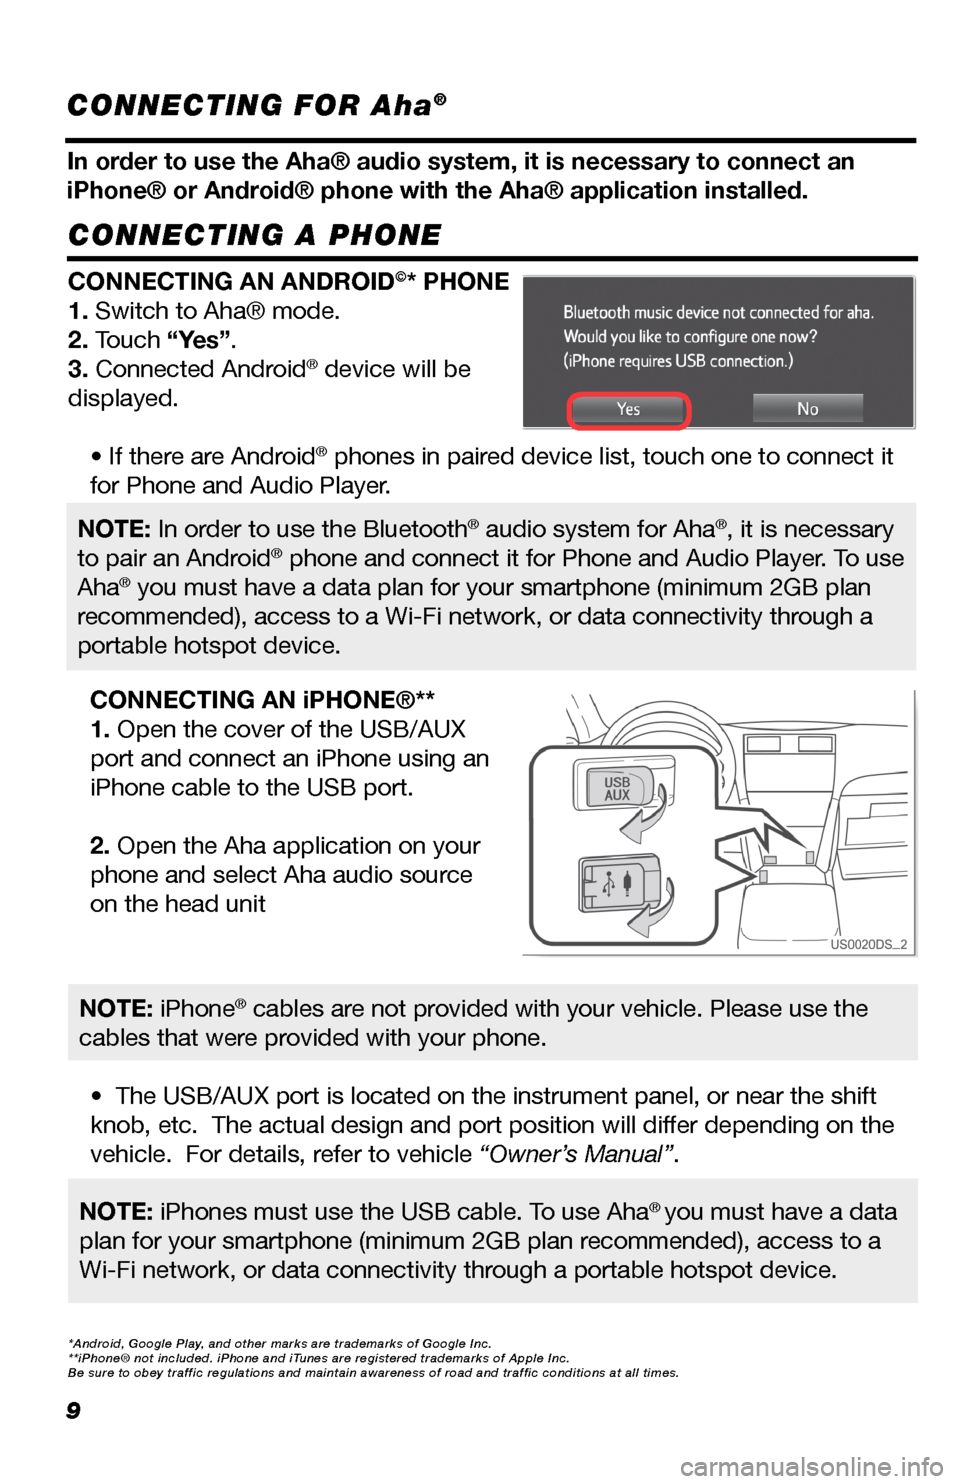 TOYOTA GT86 2017 1.G Navigation Manual 9
CONNECTING A PHONE
In order to use the Aha® audio system, it is necessary to connect an
iPhone® or Android® phone with the Aha® application installed.
CONNECTING AN ANDROID©* PHONE
1. Switch to